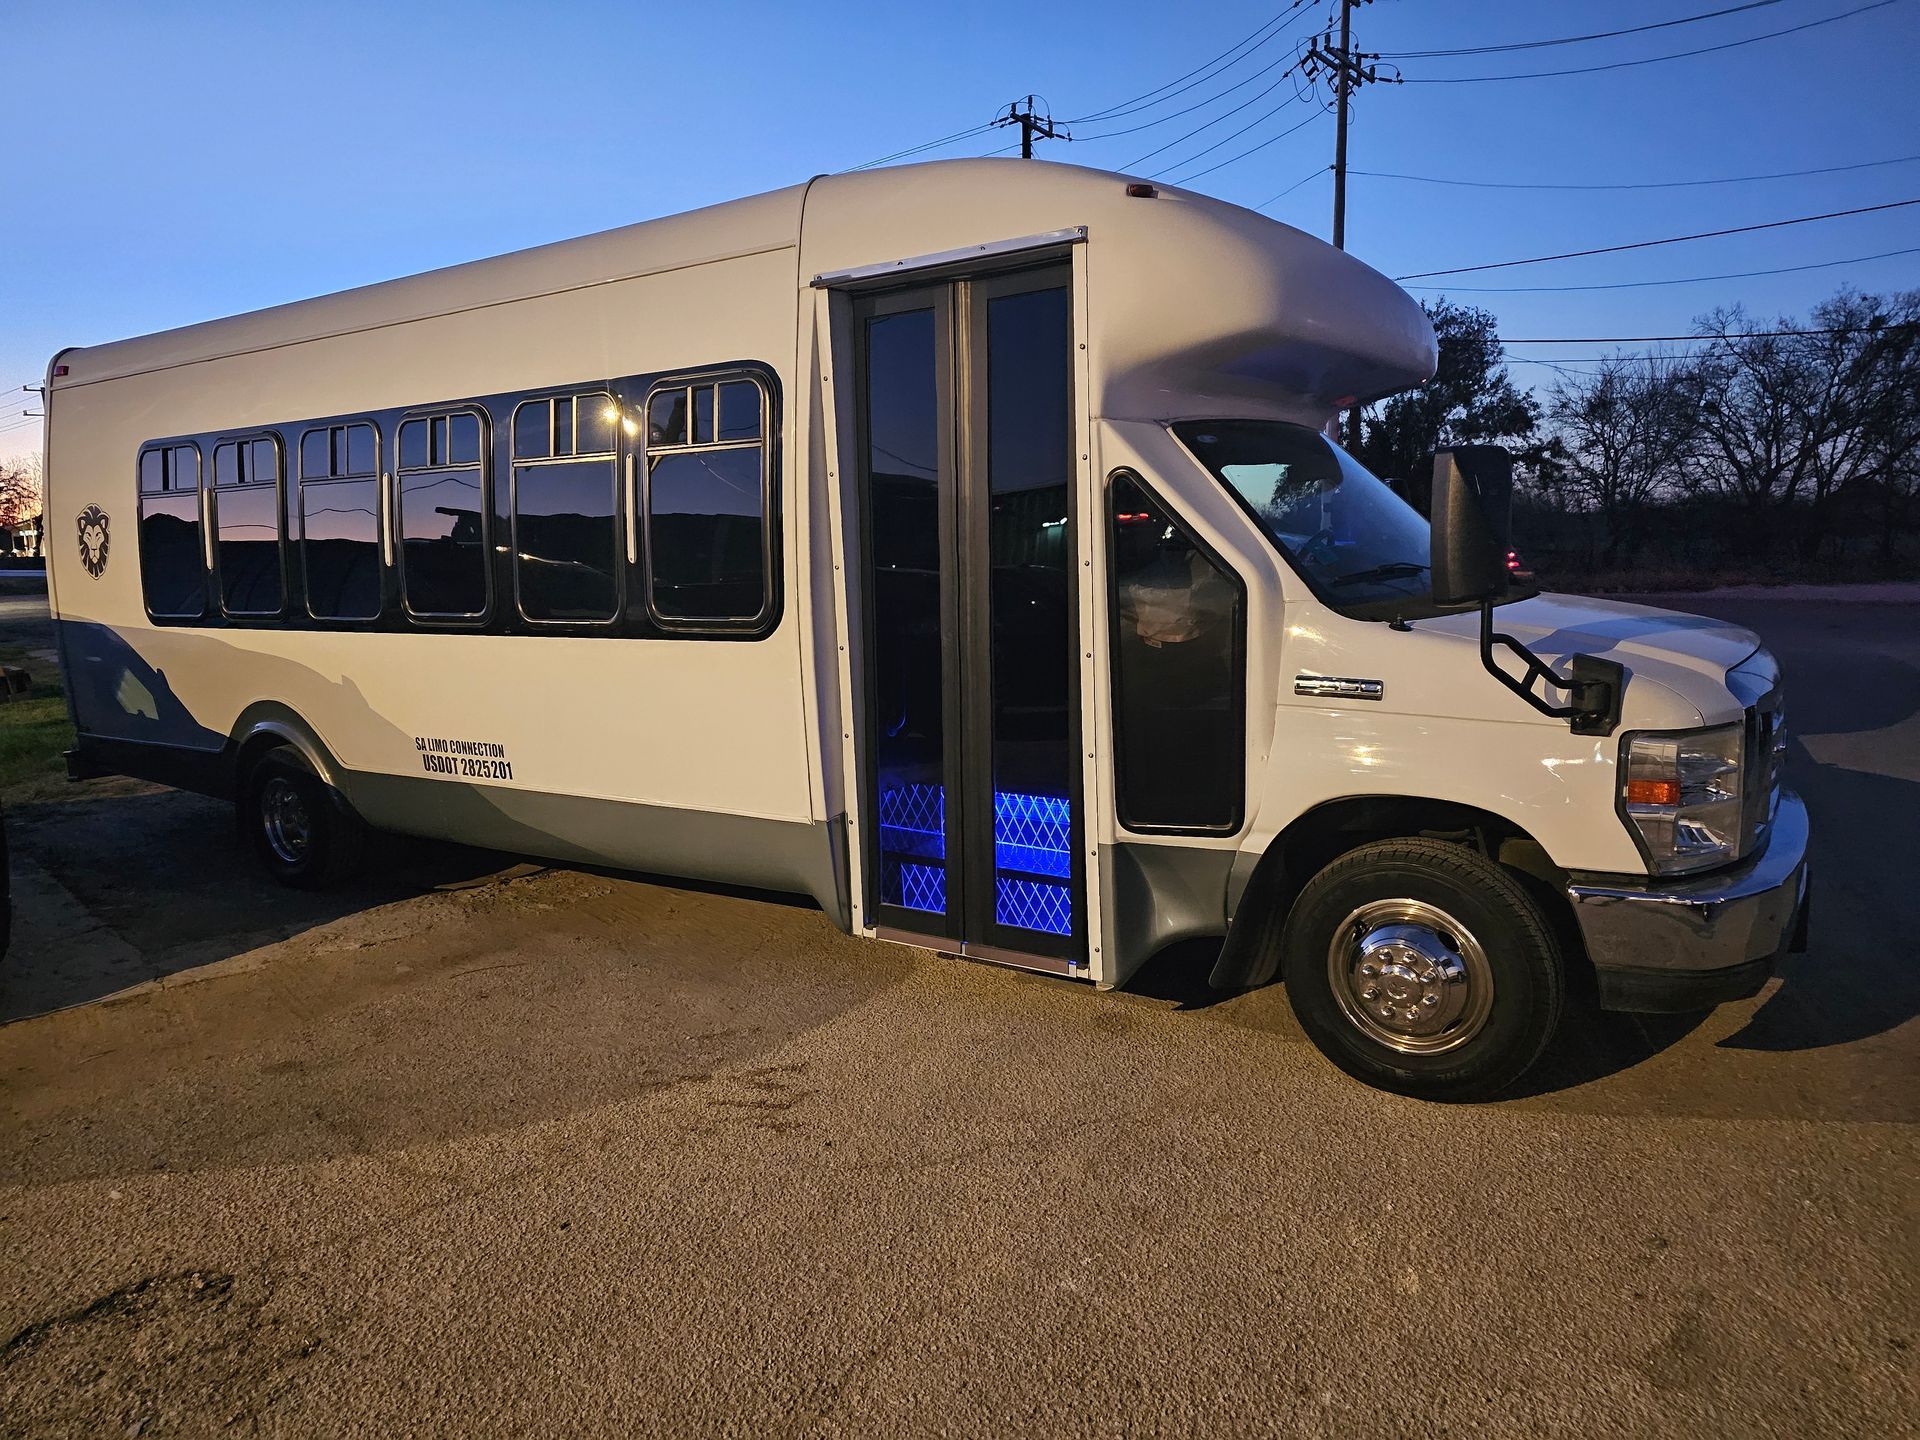 D Town SATX San Antonio white party bus for up to 24 passengers exterior view parked in Stone Oak